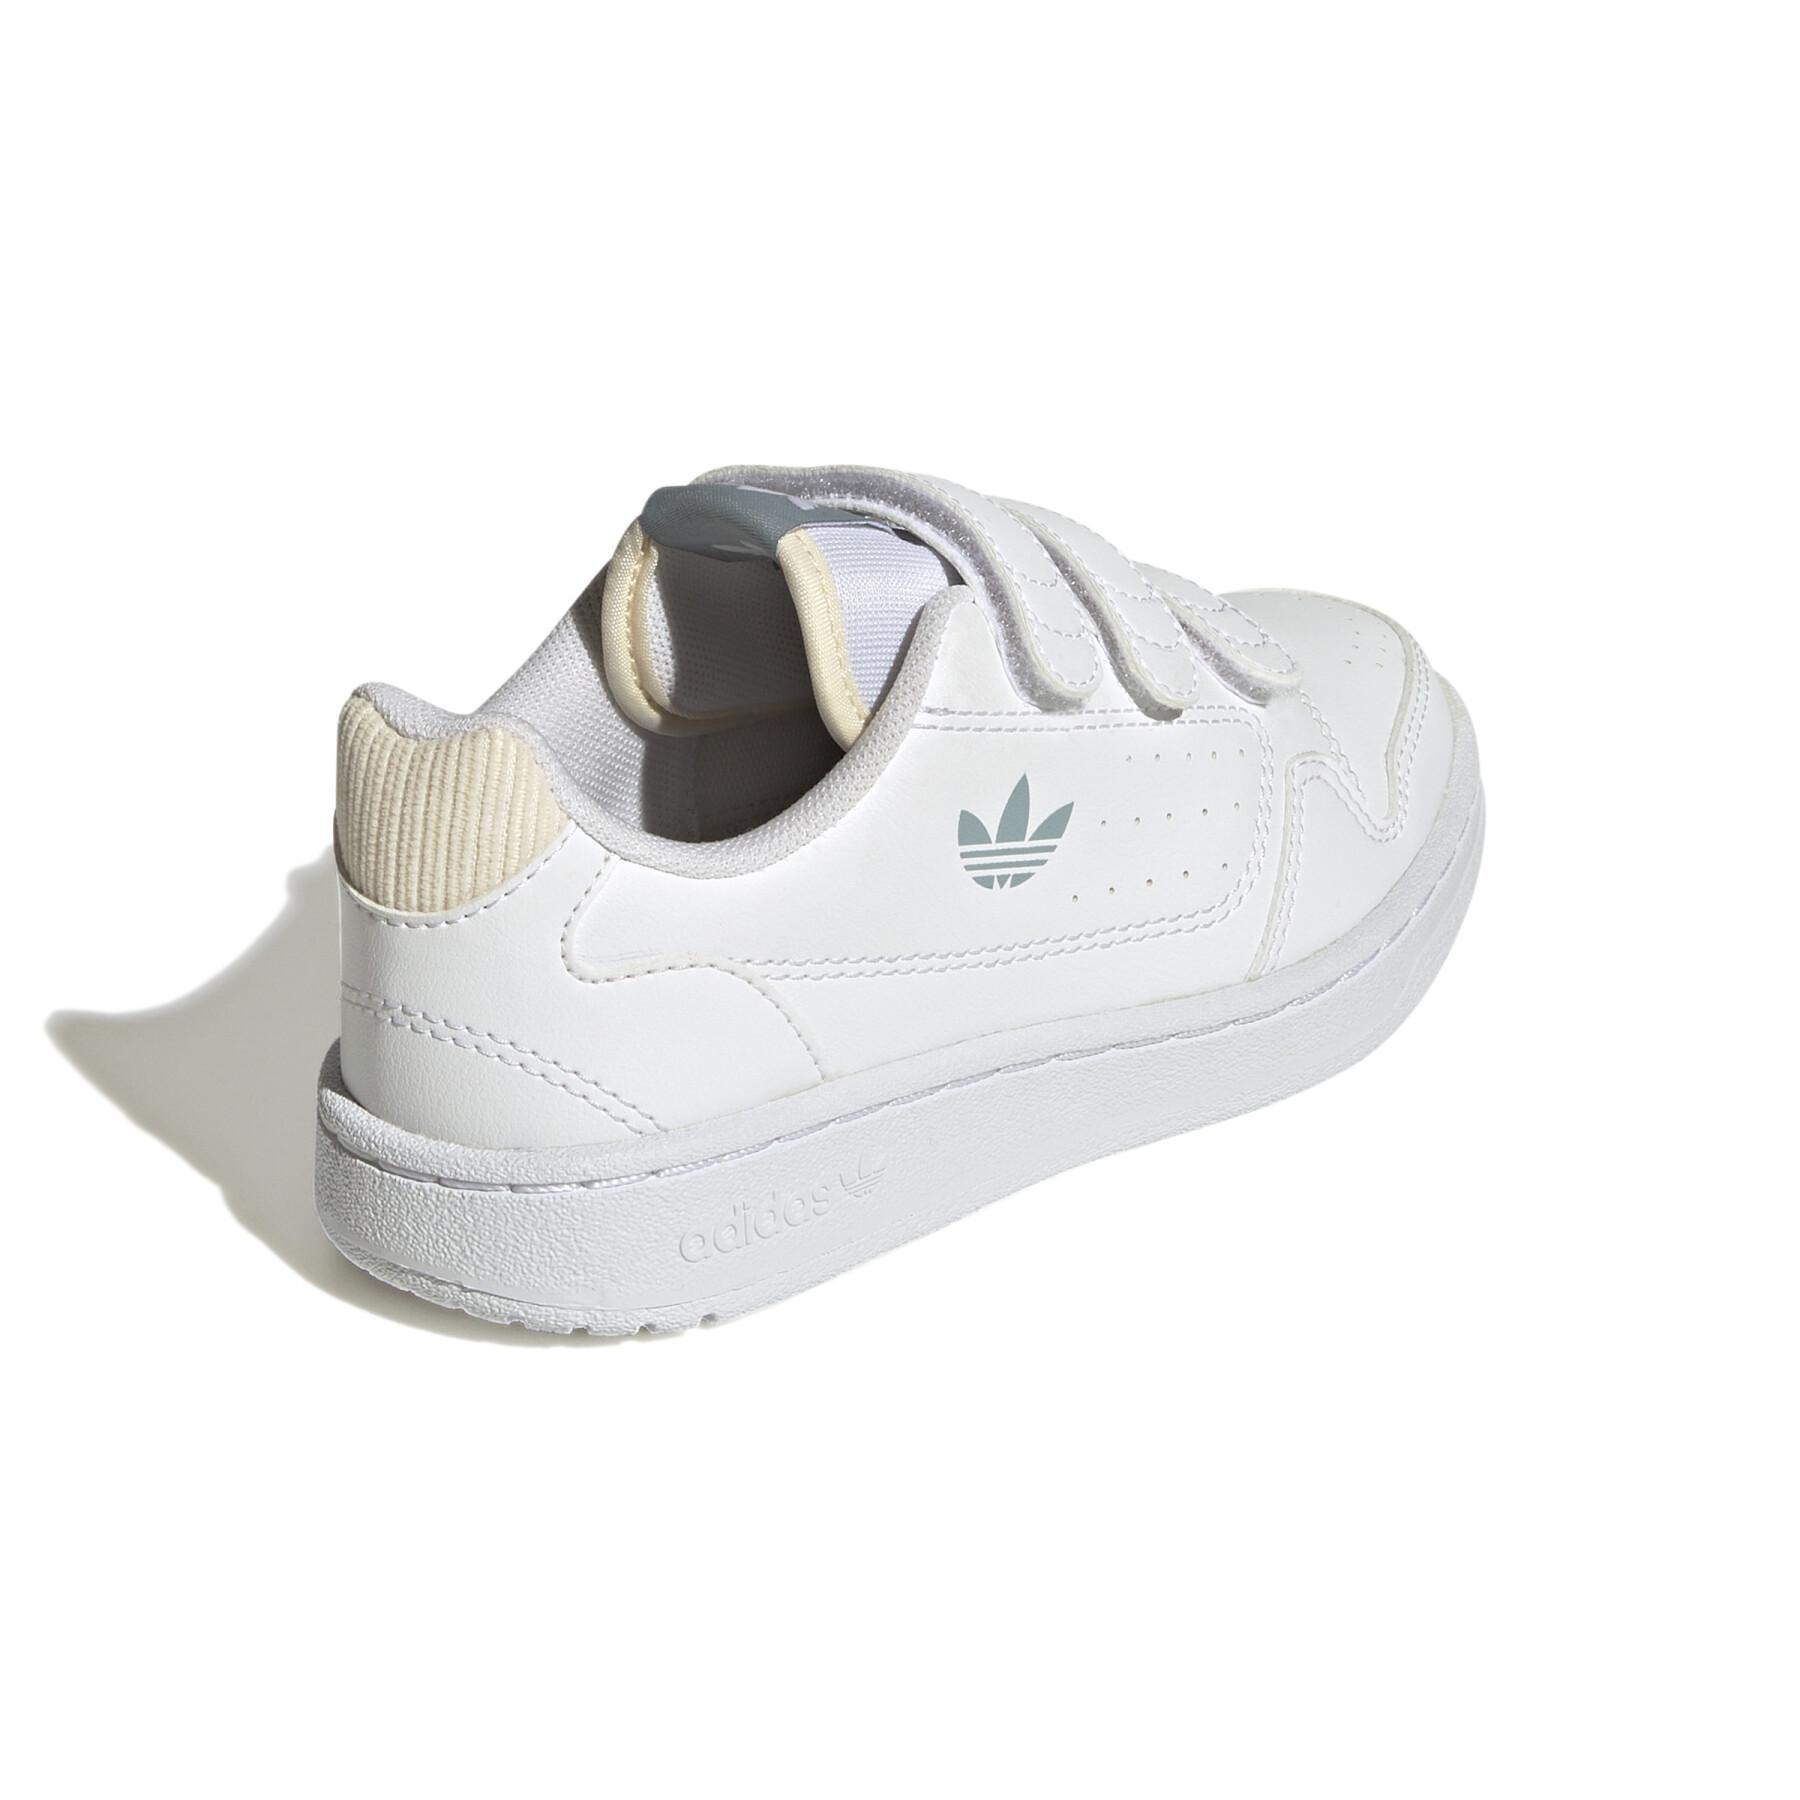 Children's shoes Adidas NY 90